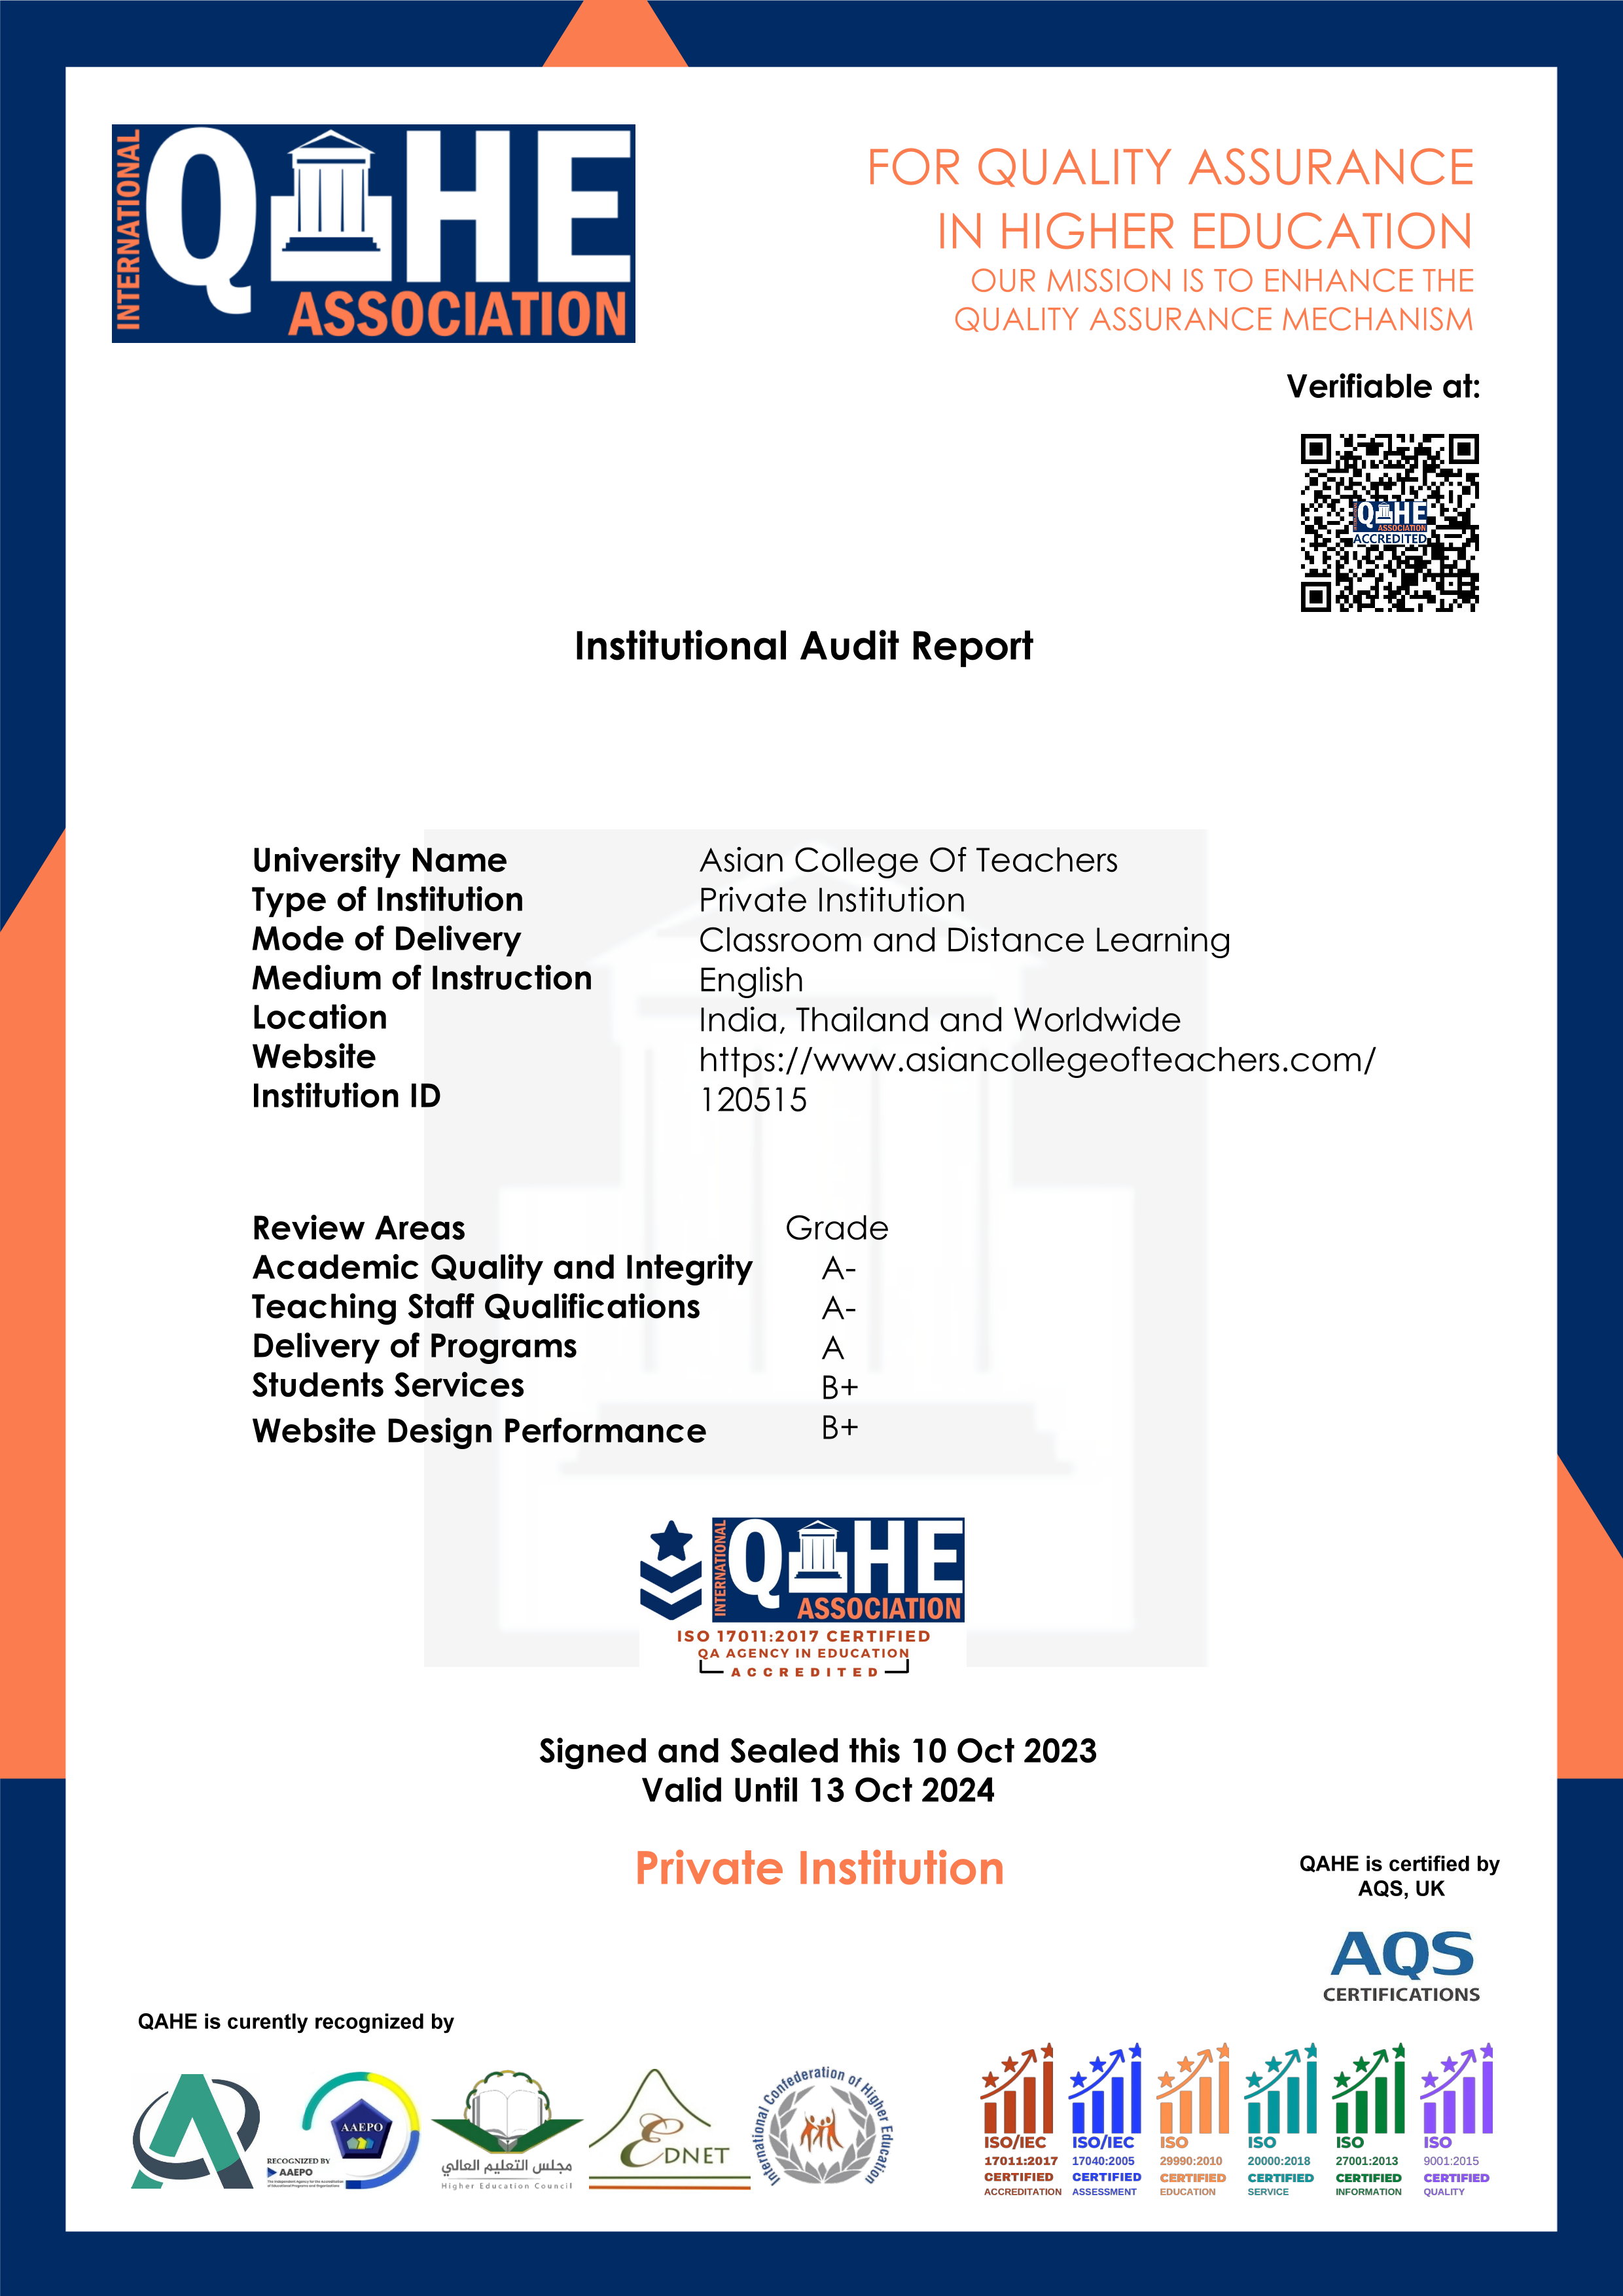 ACT’s Audit Report by QAHE